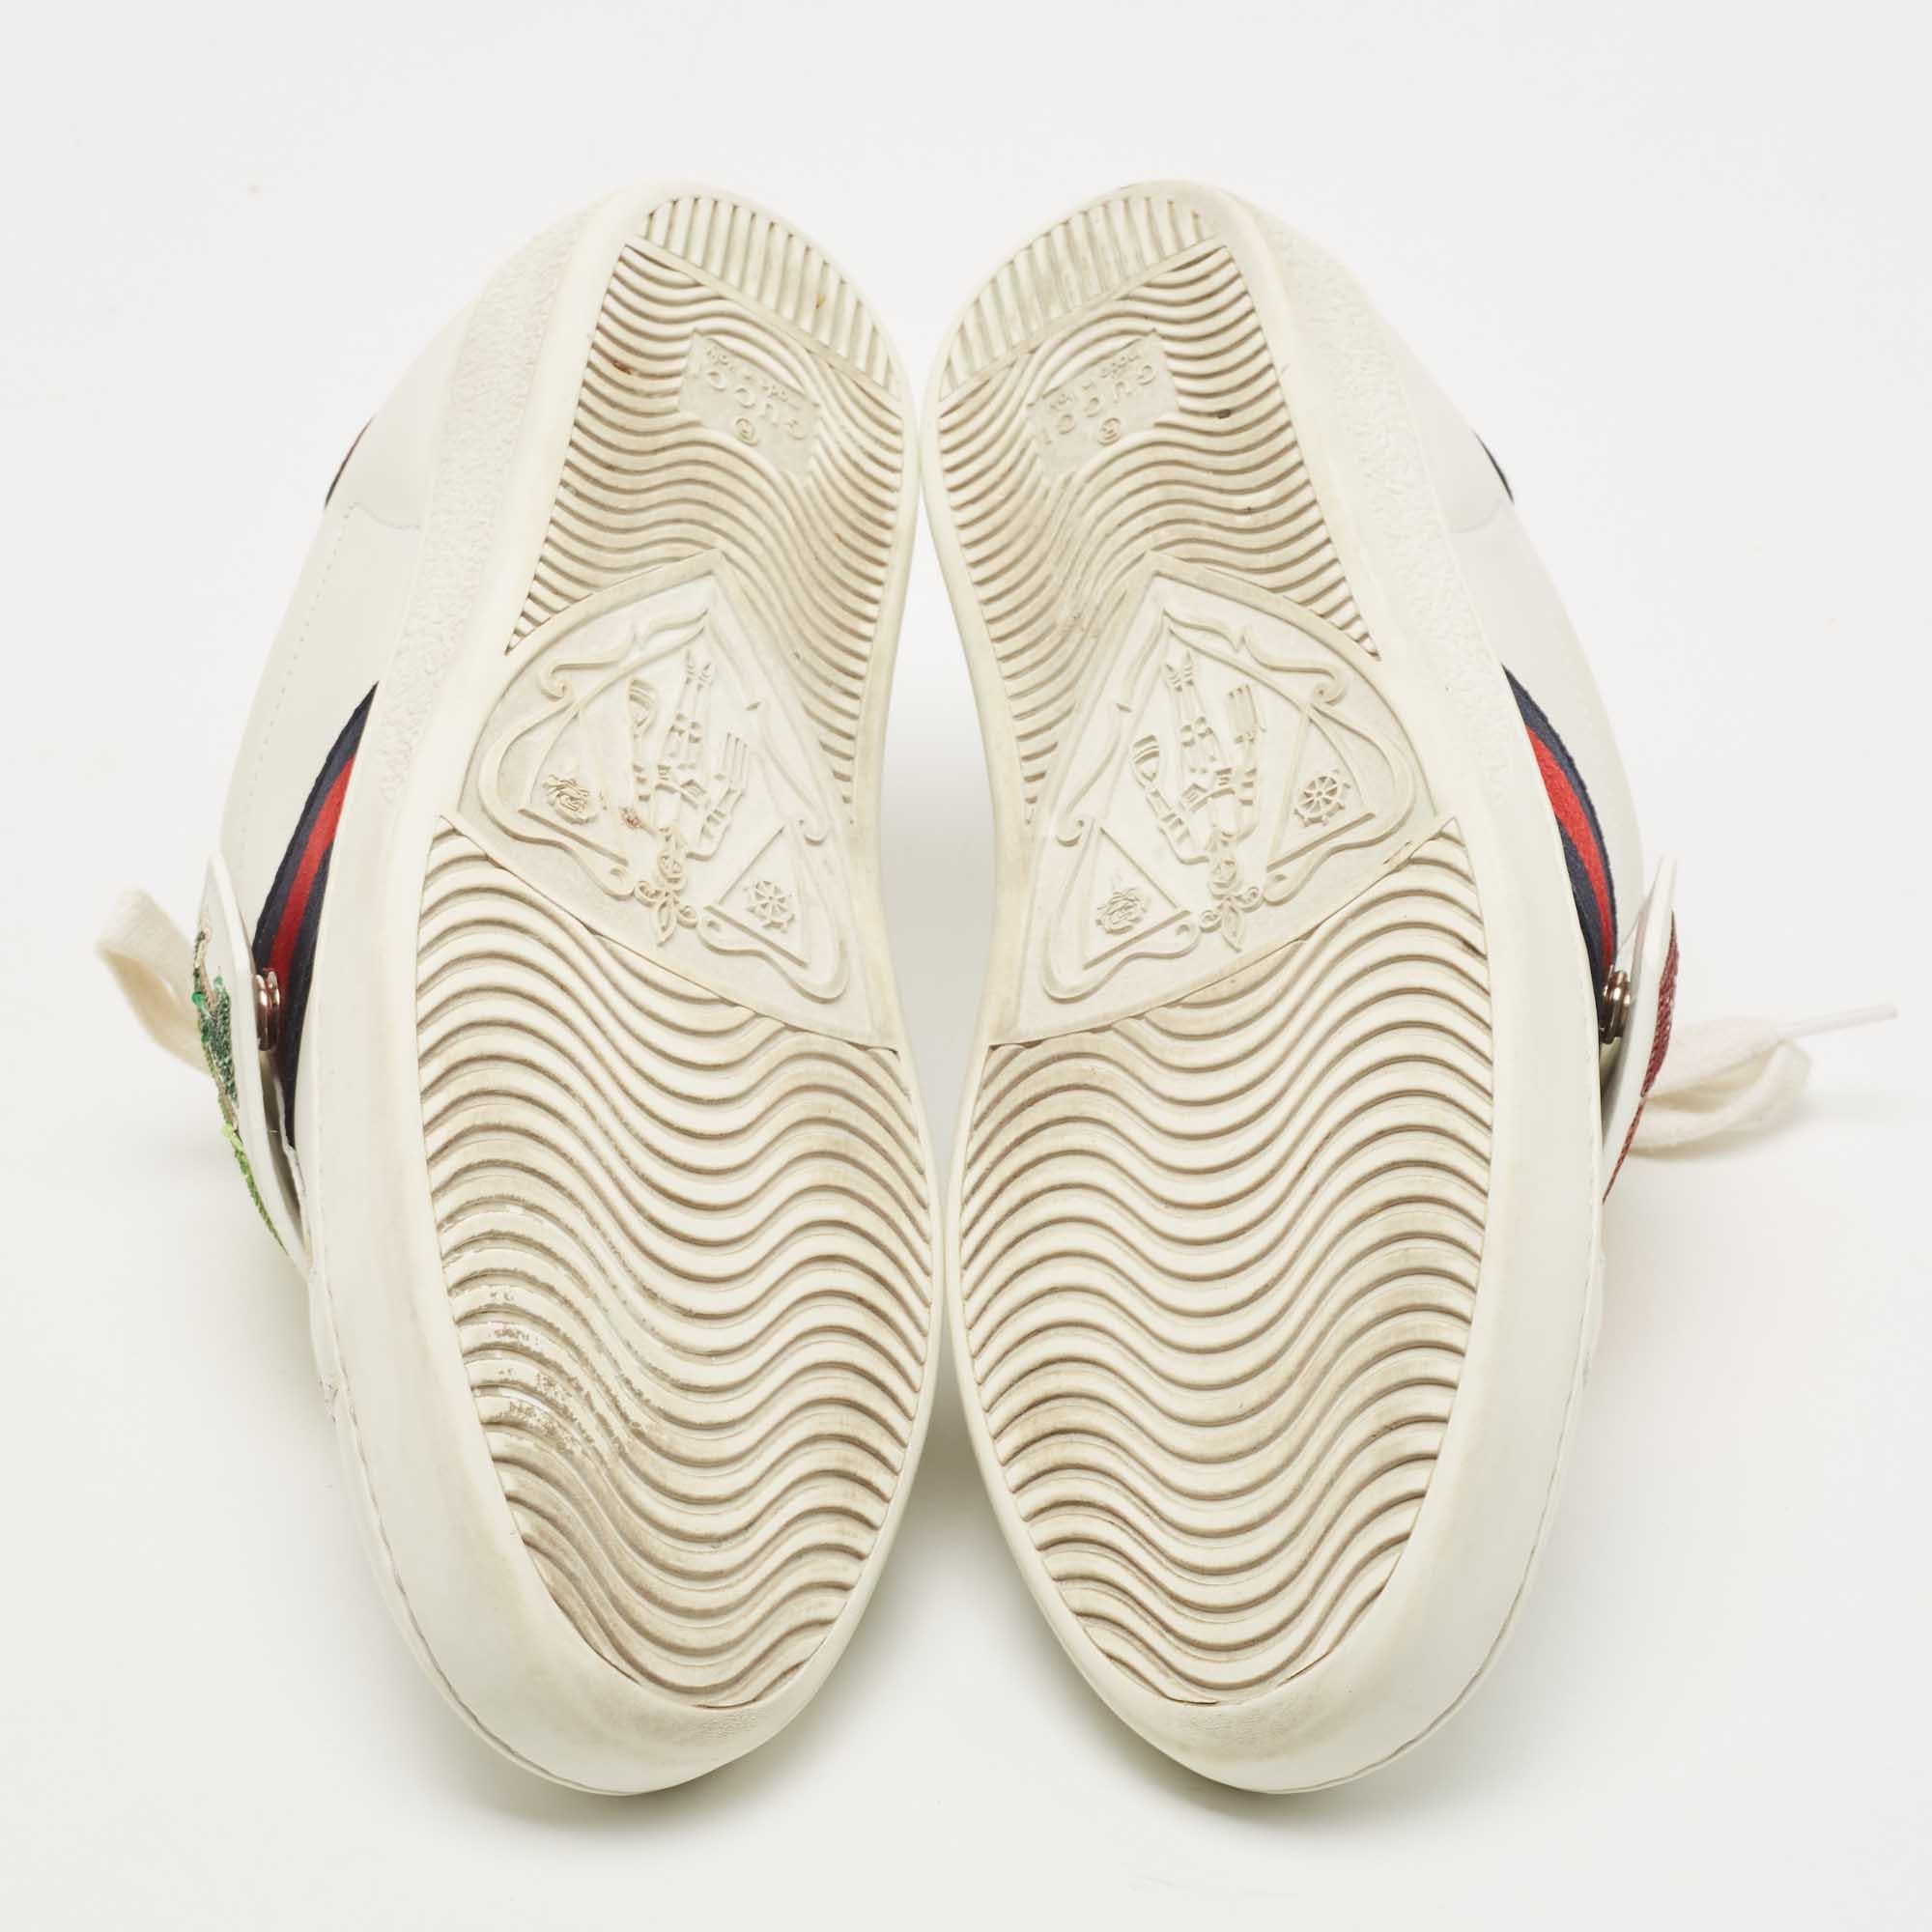 Gucci White Leather Sequin Embellished Ace Web Detail Low Top Sneakers Size 37 5